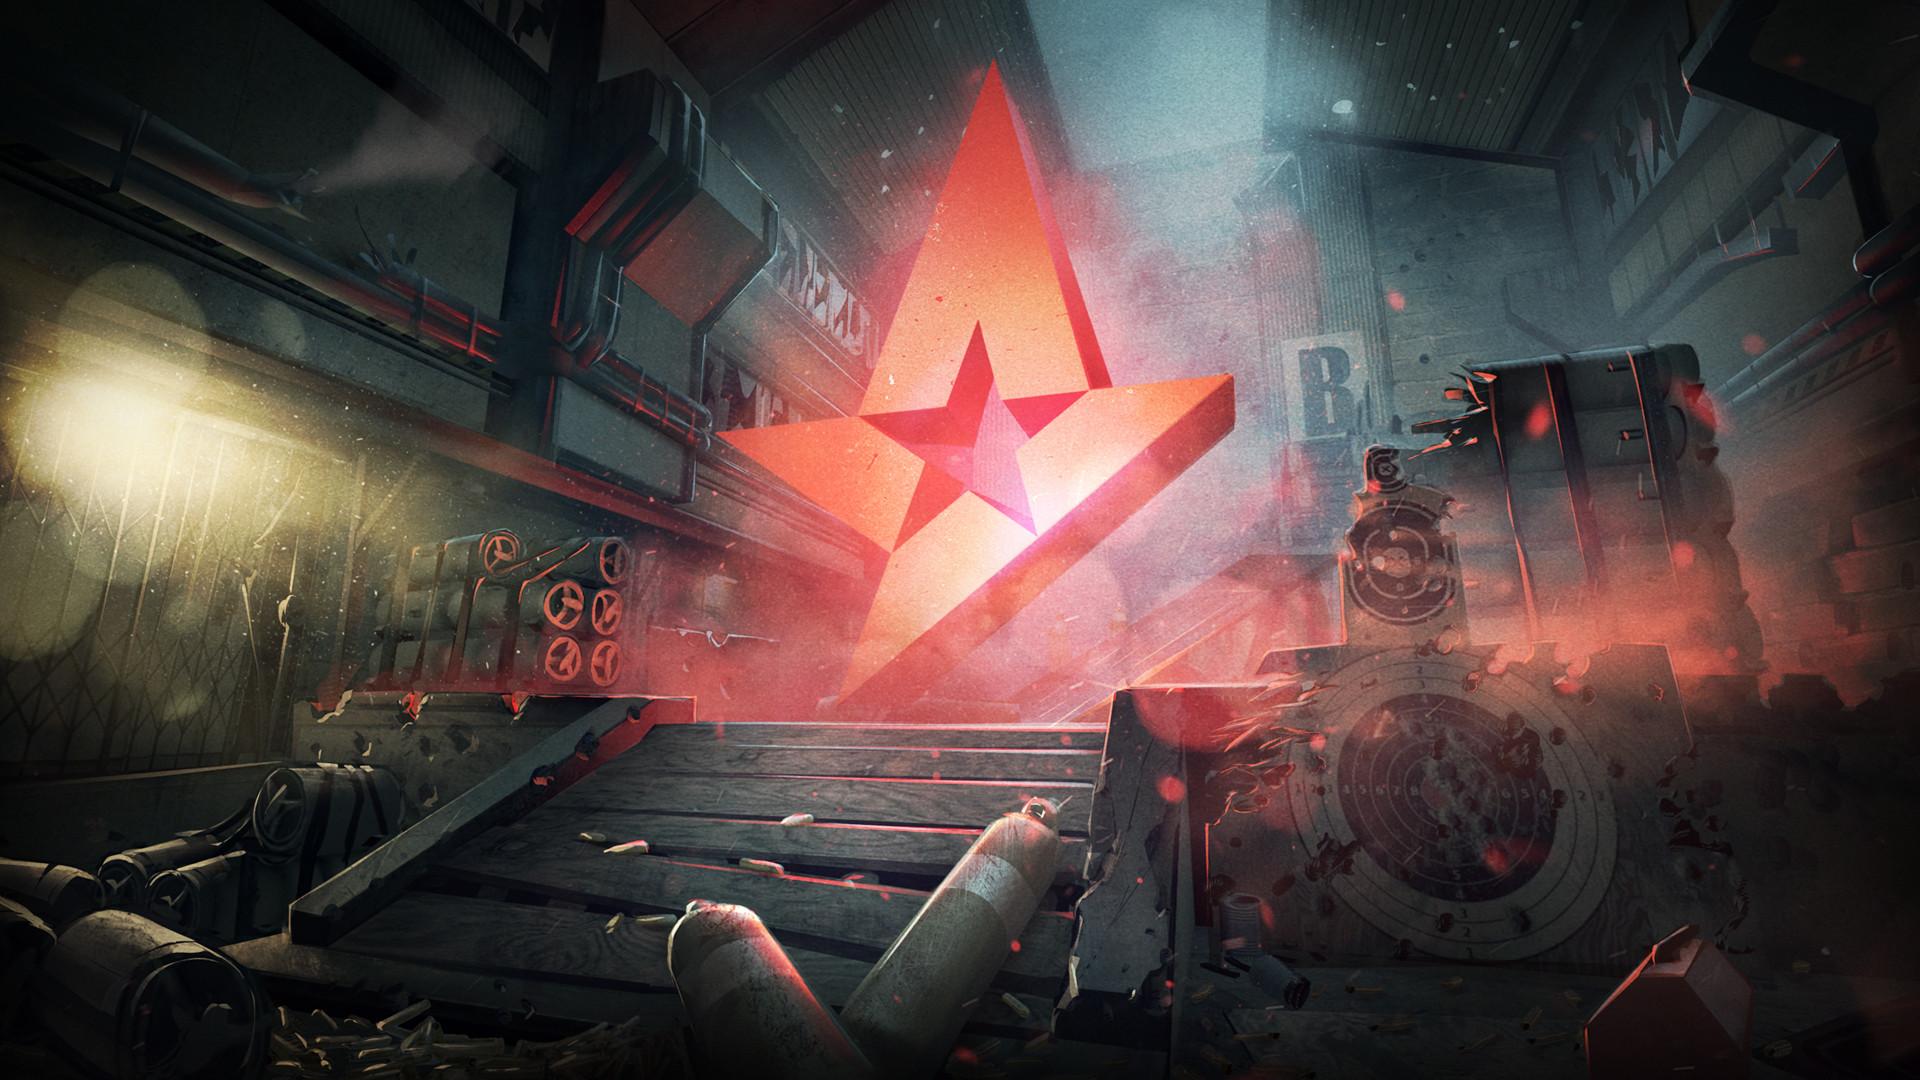 HD wallpaper, Astralis, Electronic Sports League, Red